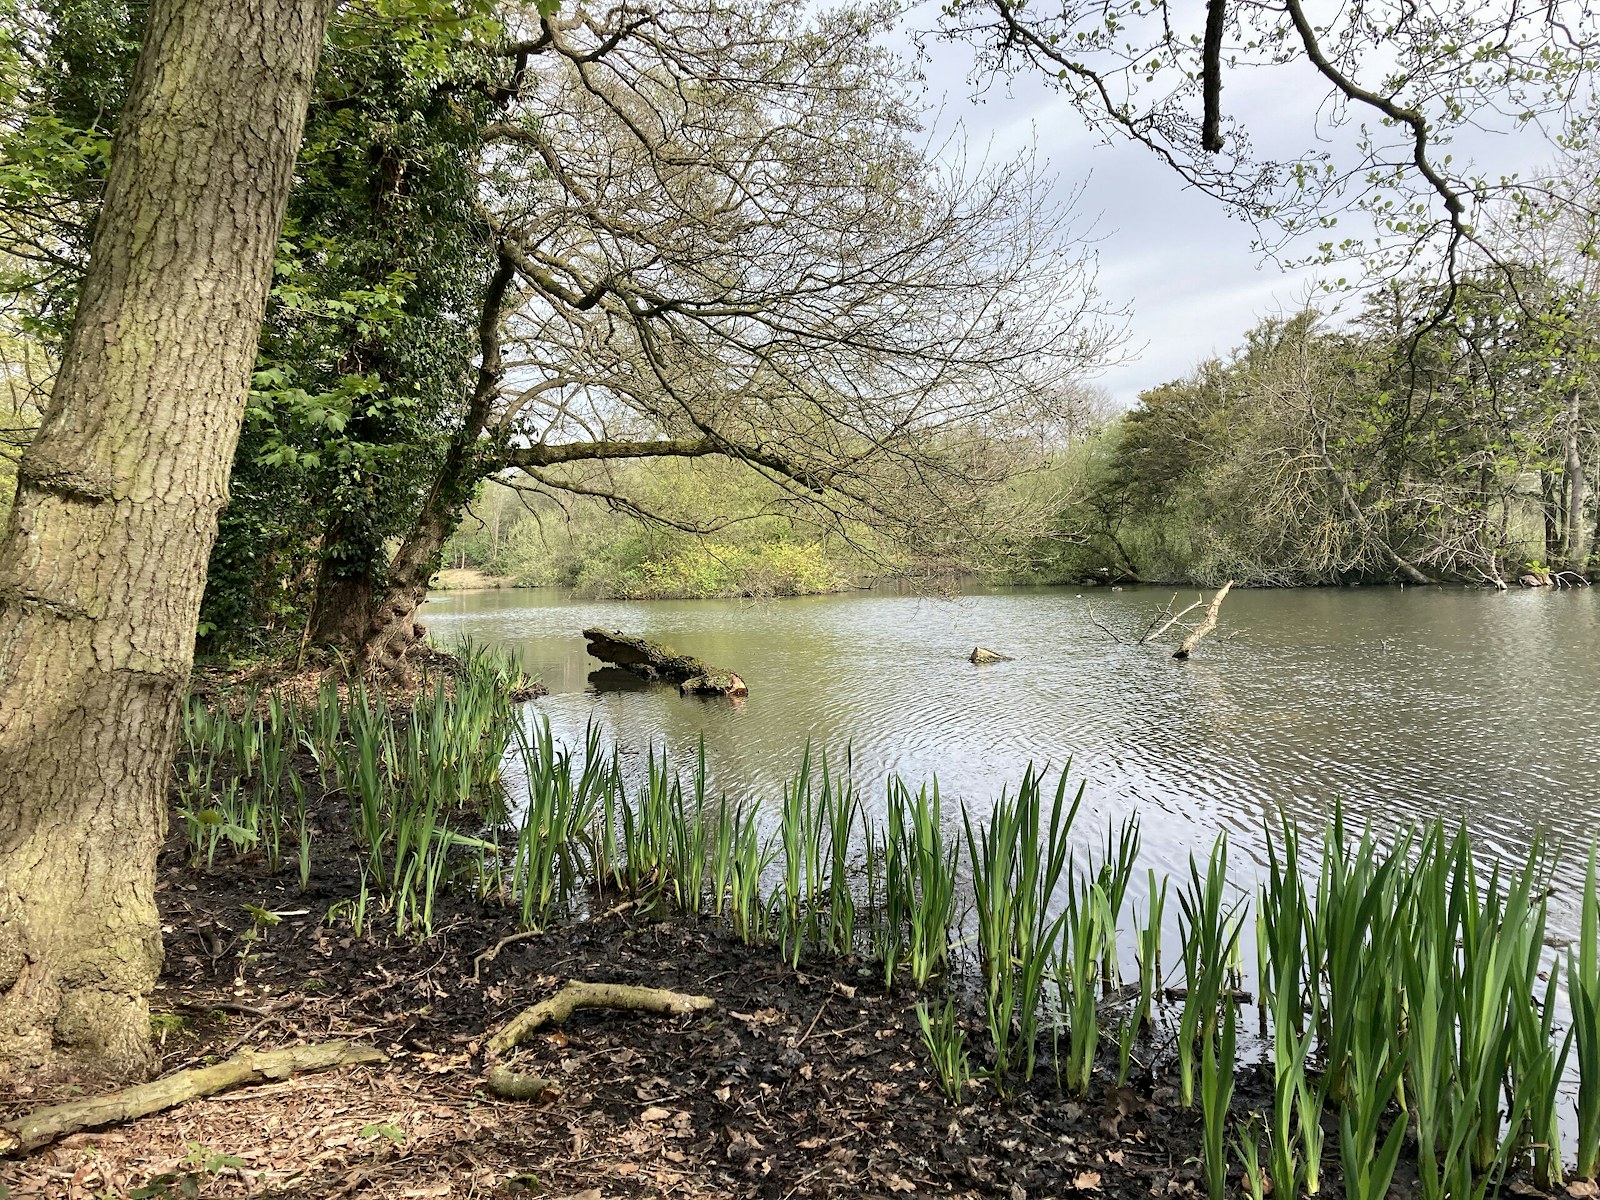 Lake and trees at Allestree Park rewilding project